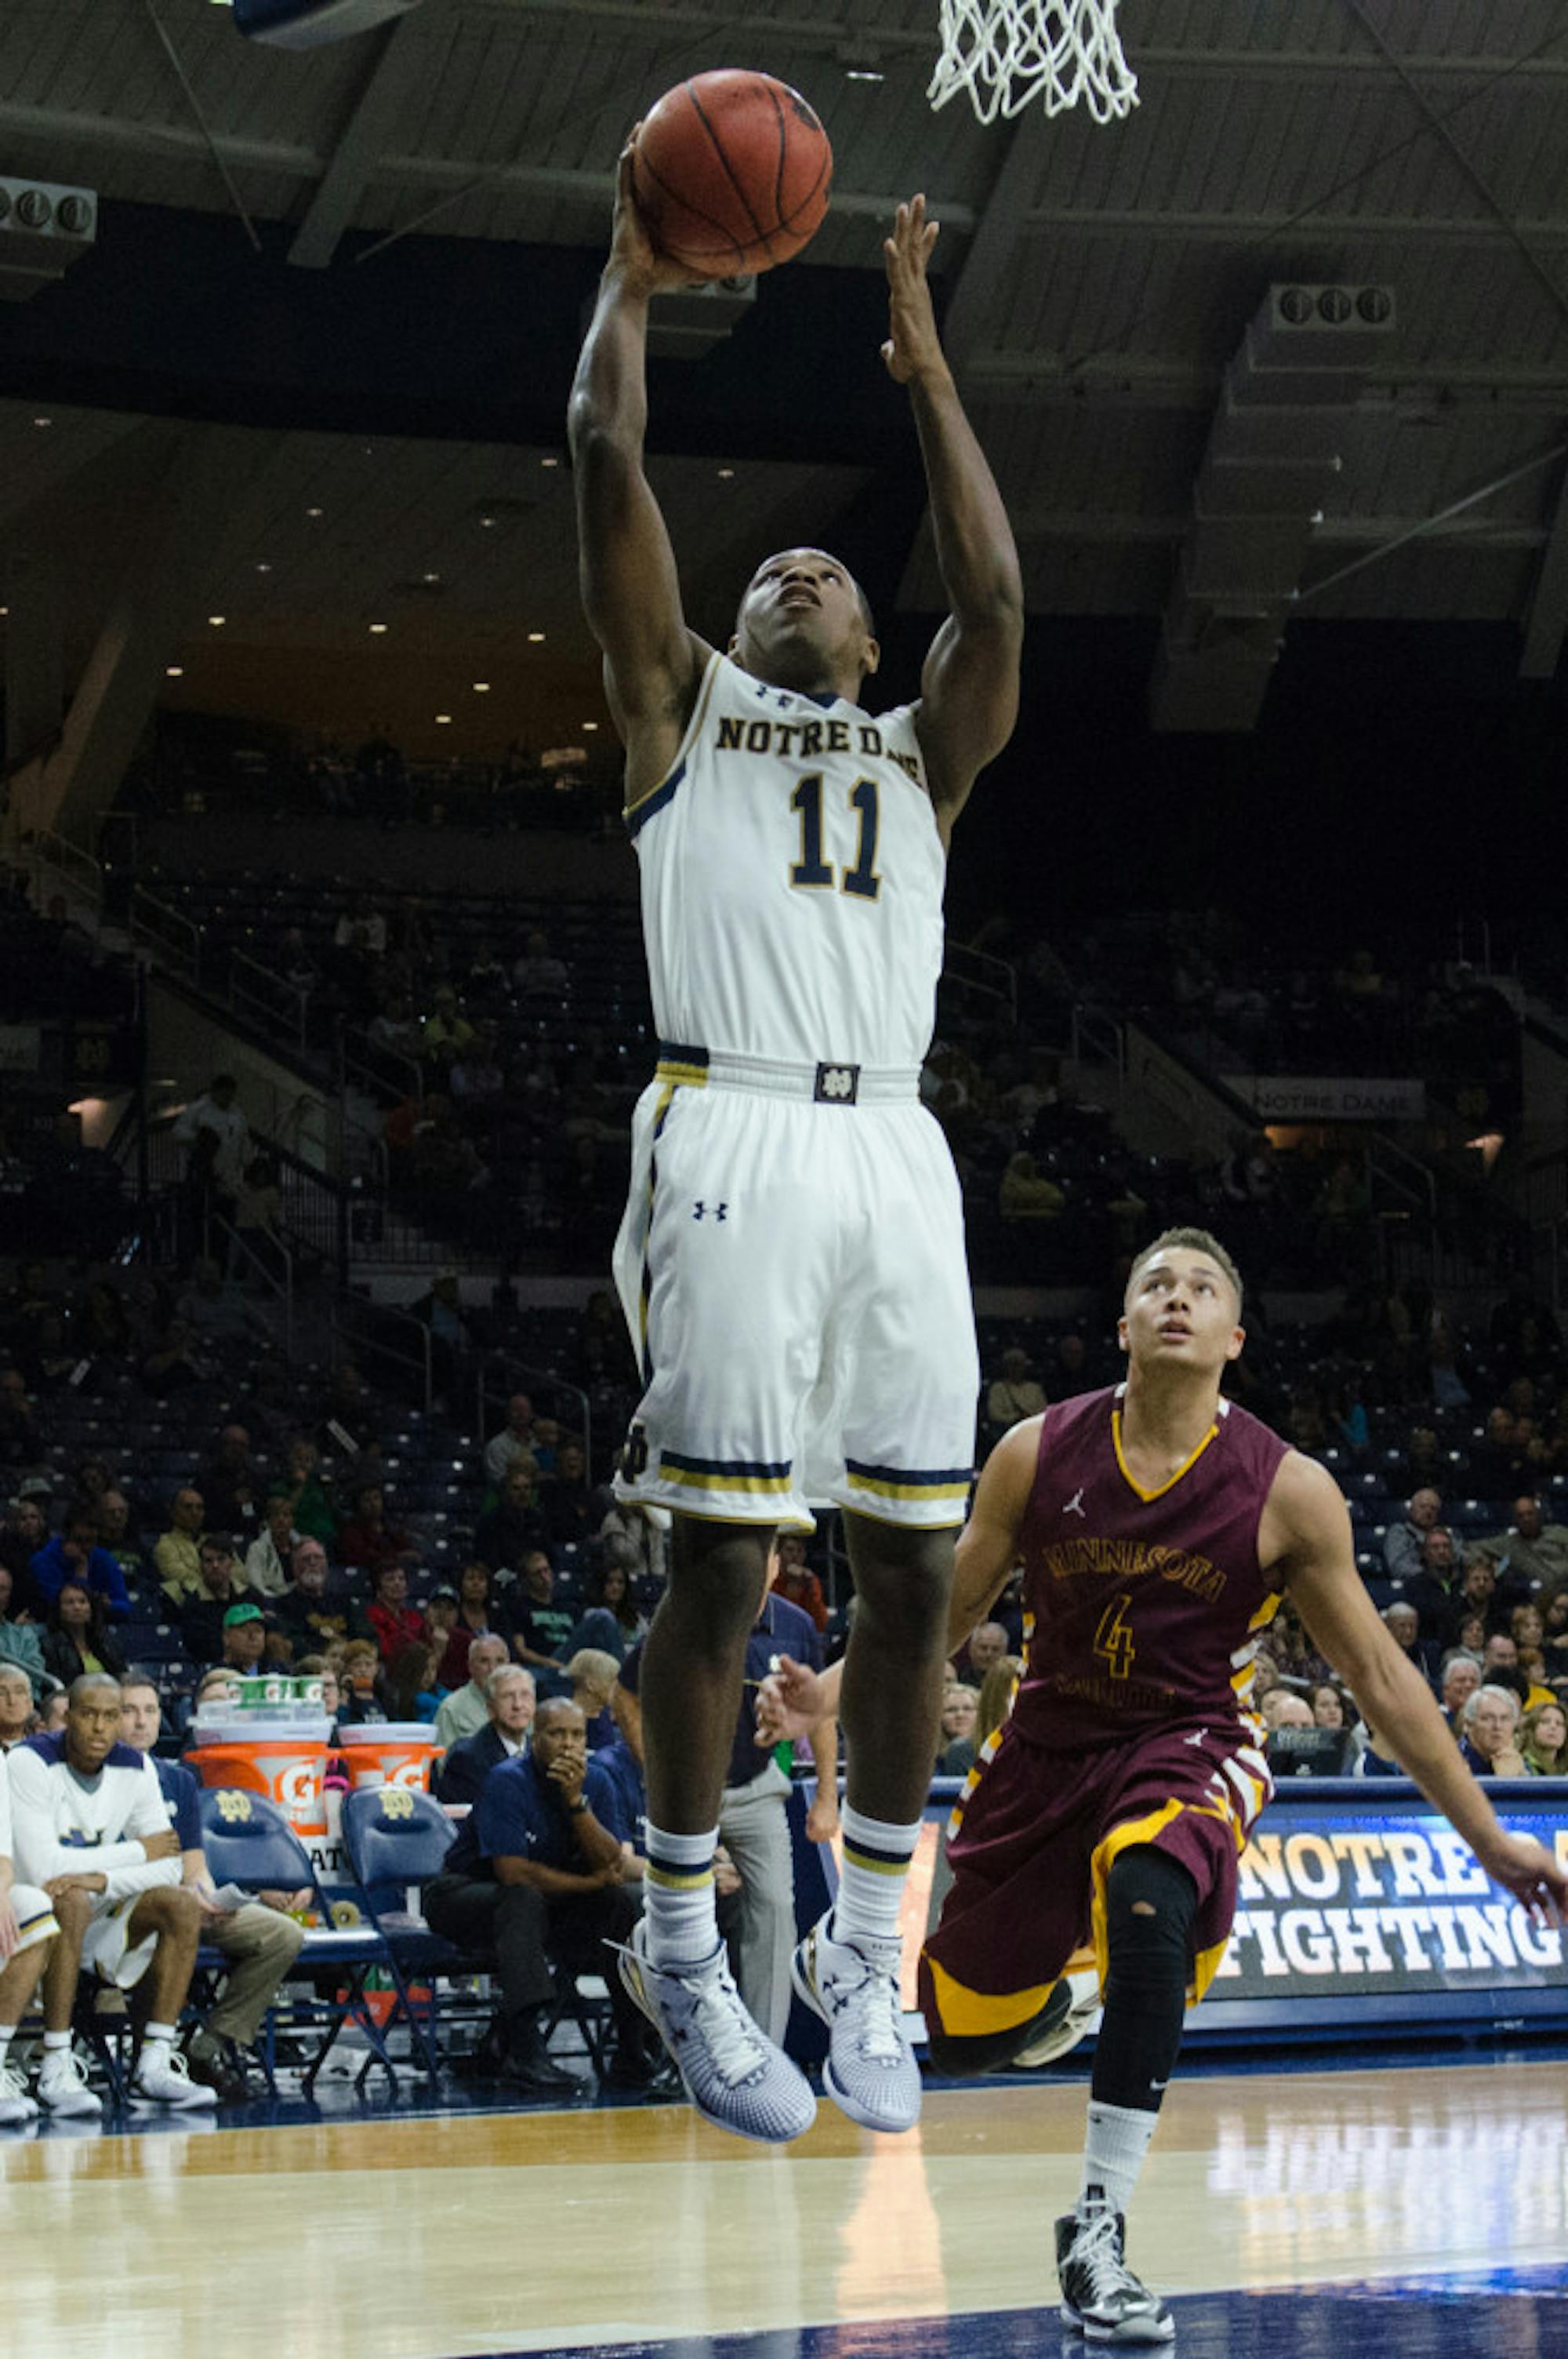 Irish sophomore guard Demetrius Jackson goes up for a layup Nov. 1 during Notre Dame’s 88-71 win over Minnesota Duluth